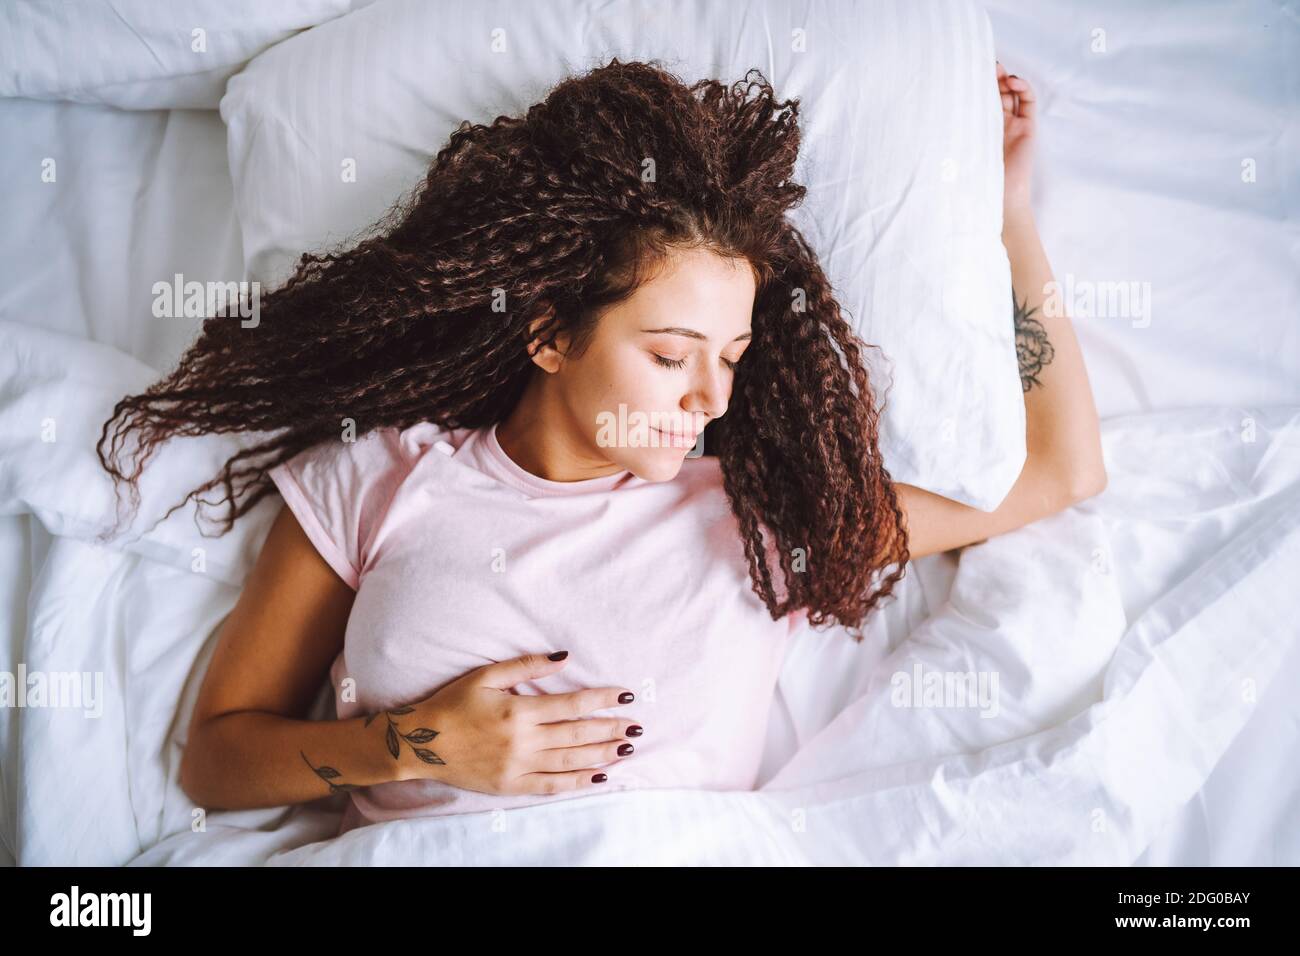 Top view of young afro haired woman sleeping in morning lying on bed with snow white linens. Stock Photo